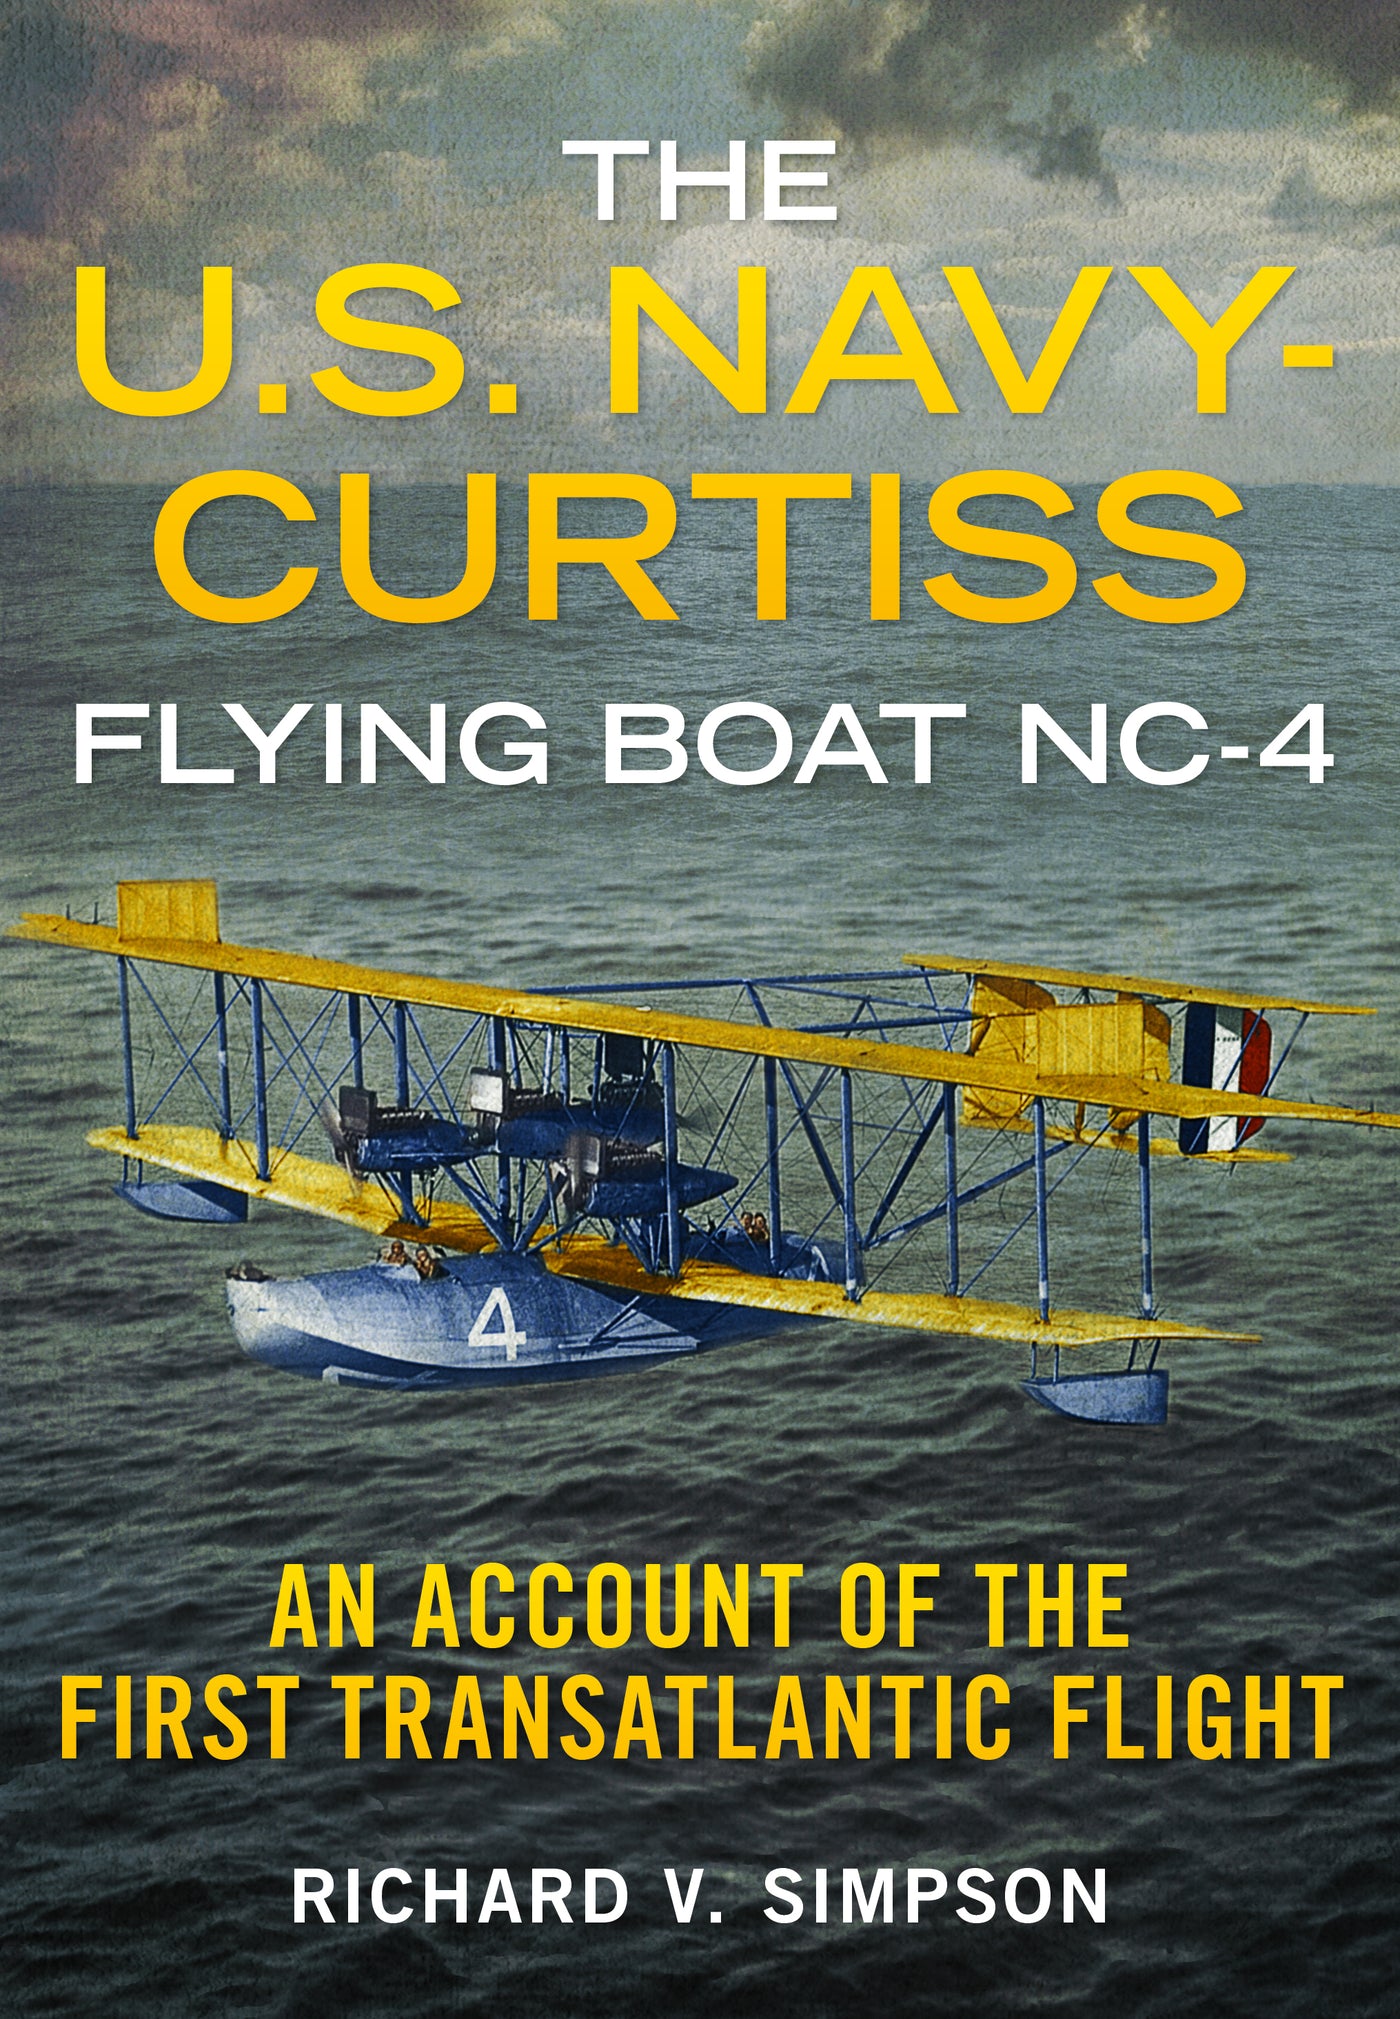 The U.S. Navy-Curtiss Flying Boat NC-4